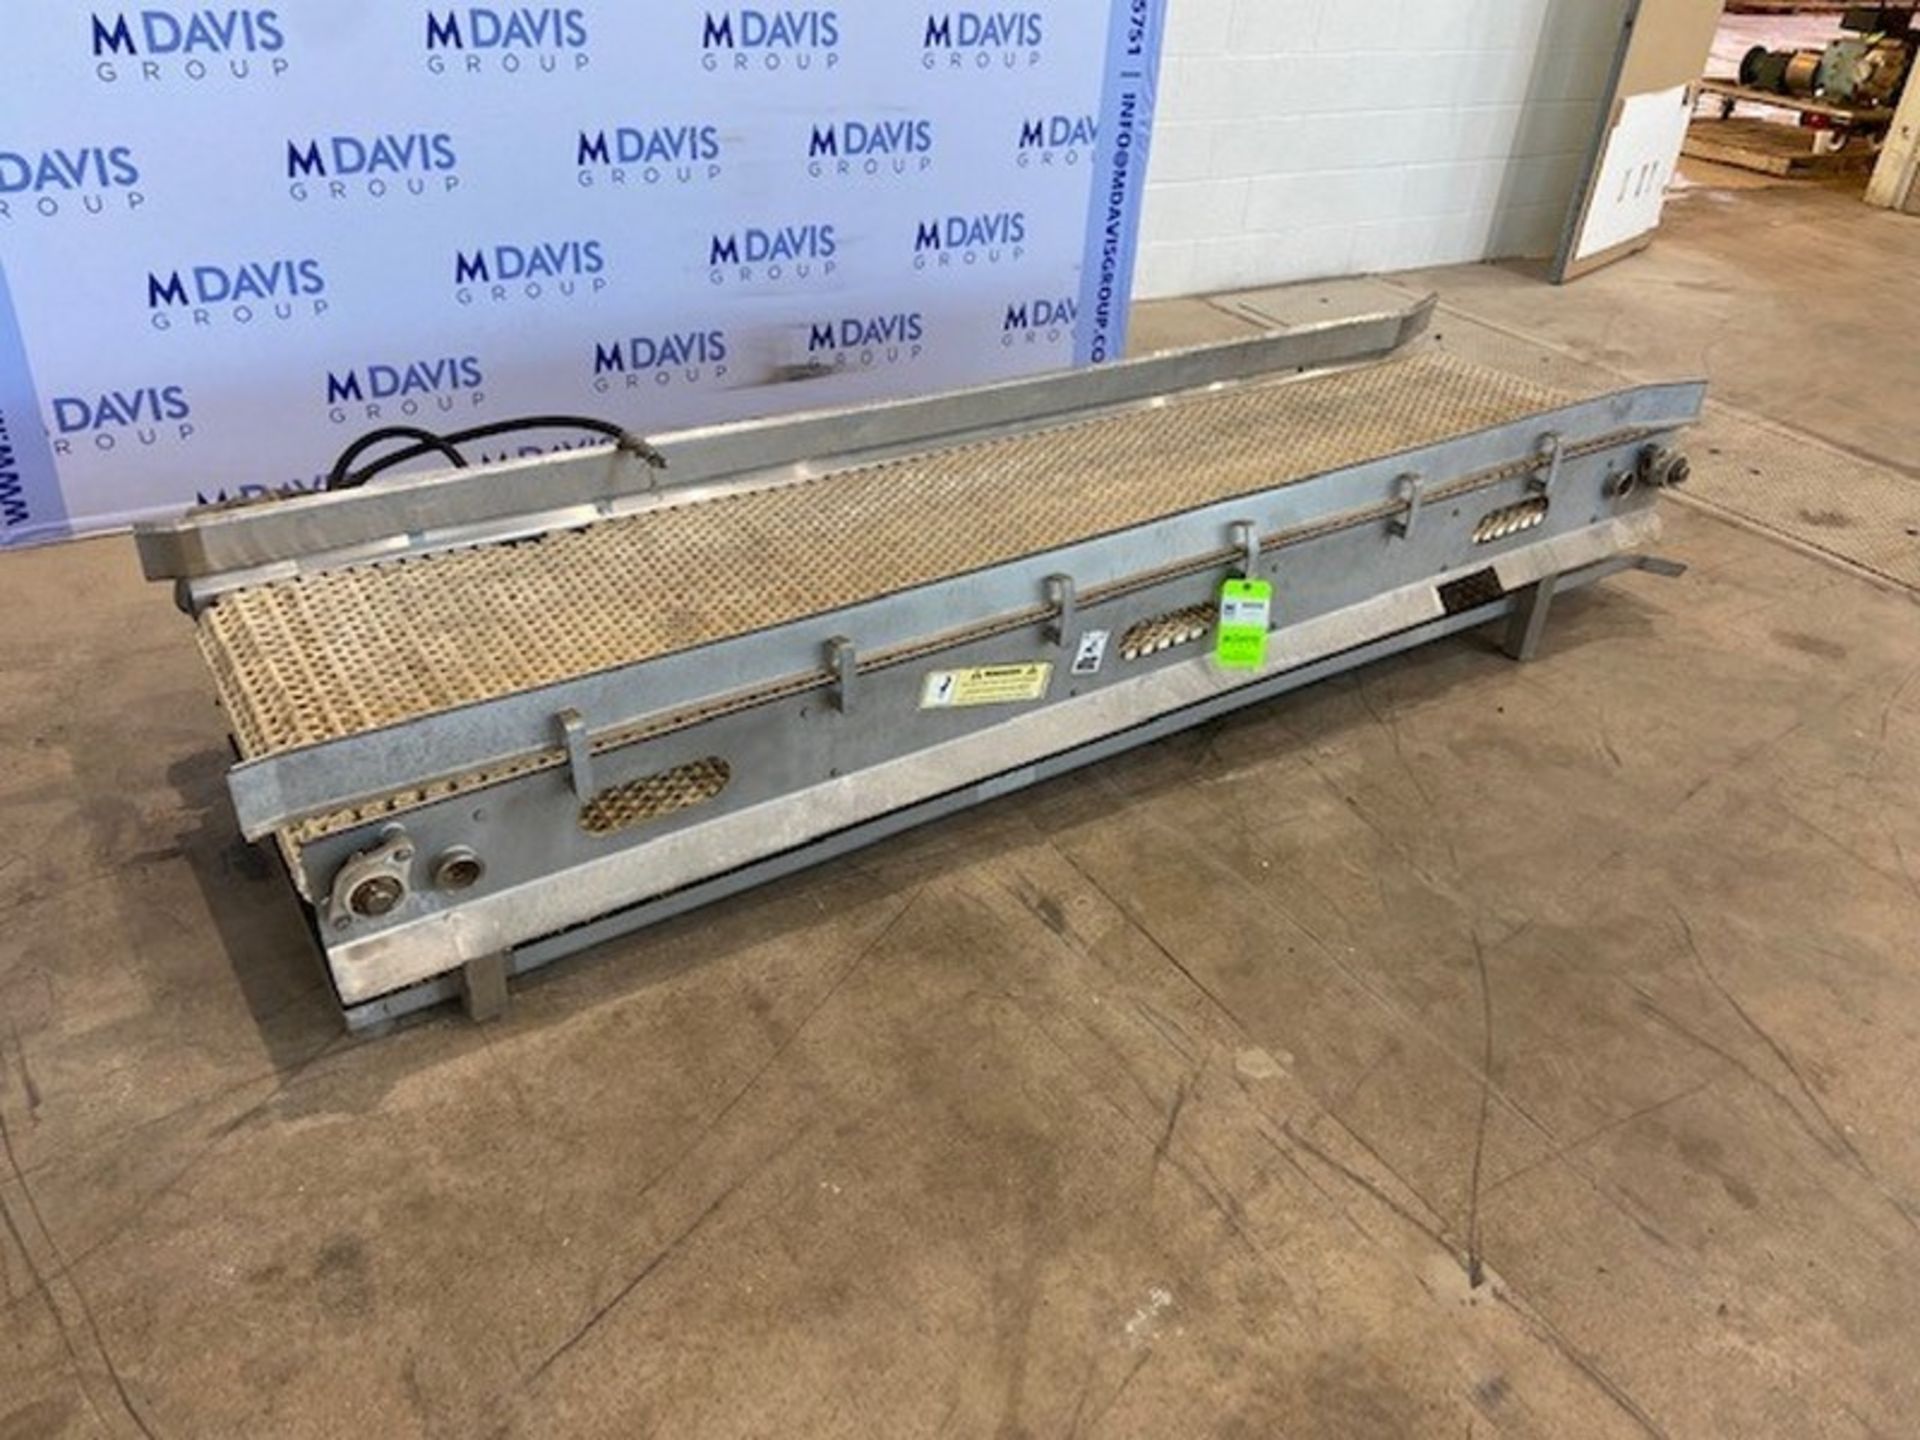 Straight Section of Conveyor,Aprox. 114" L, with Aprox. 24" W Plastic Interlock Belt, - Image 2 of 5